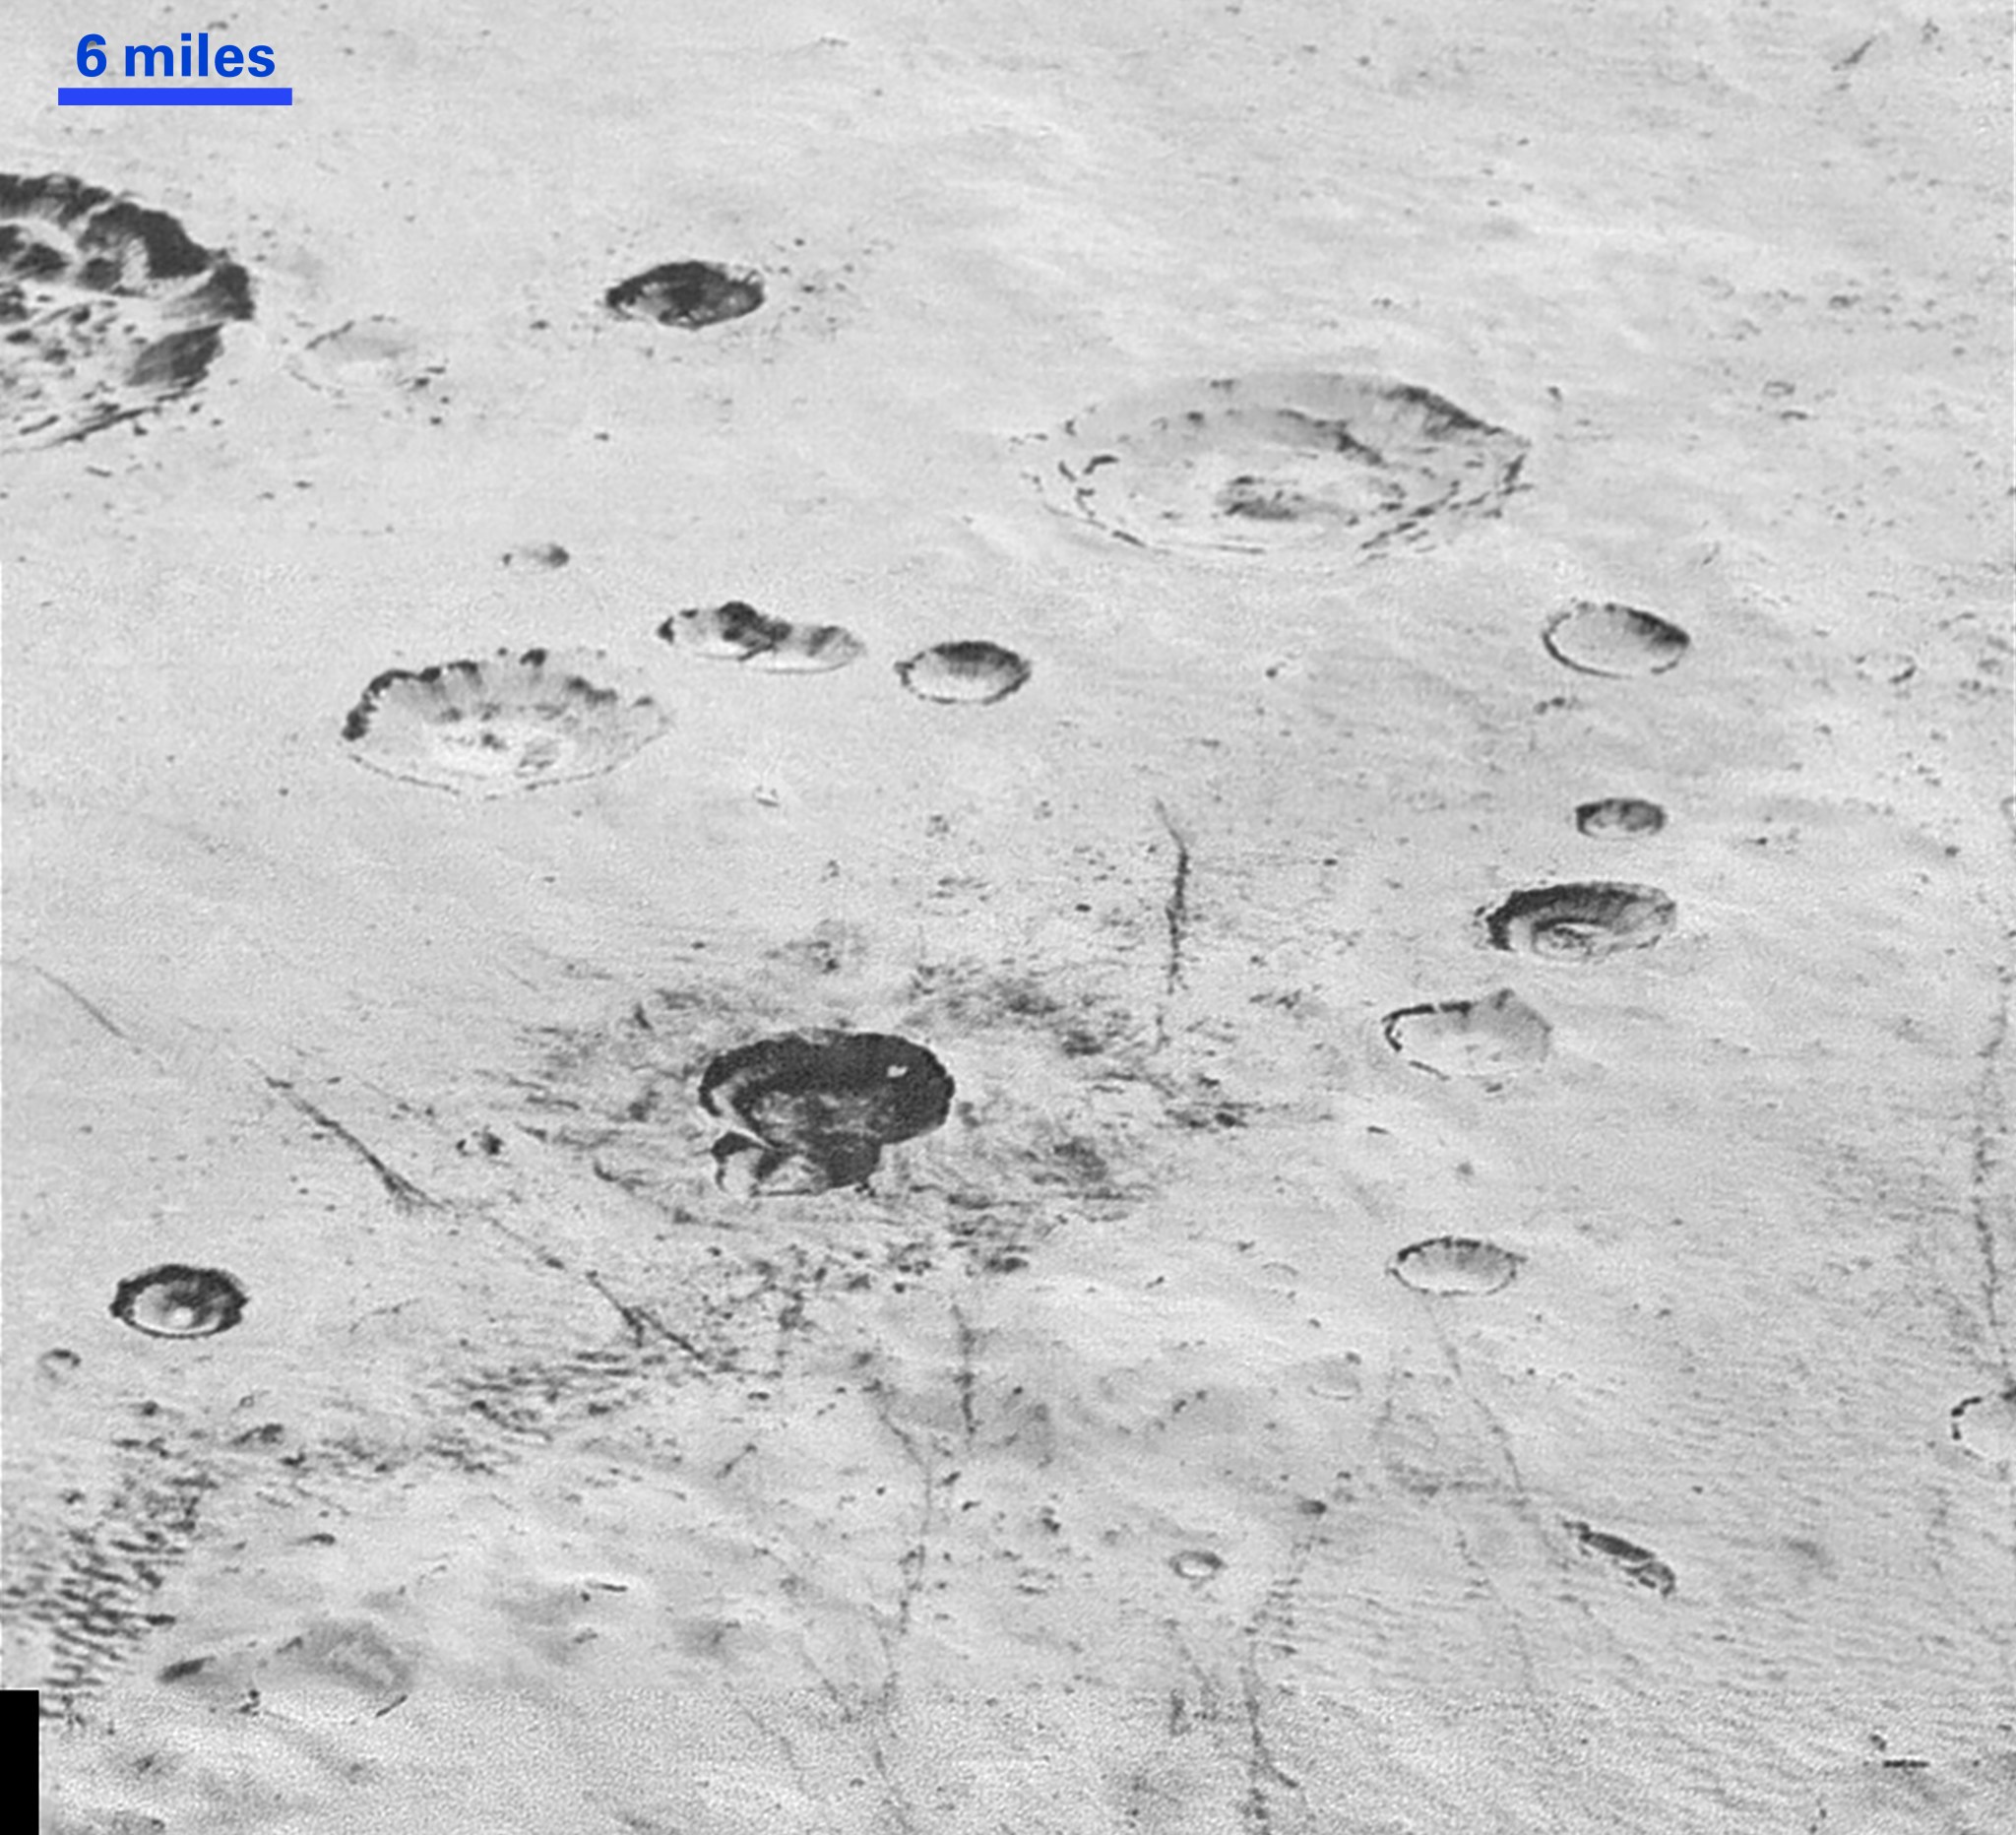 Pluto's large craters